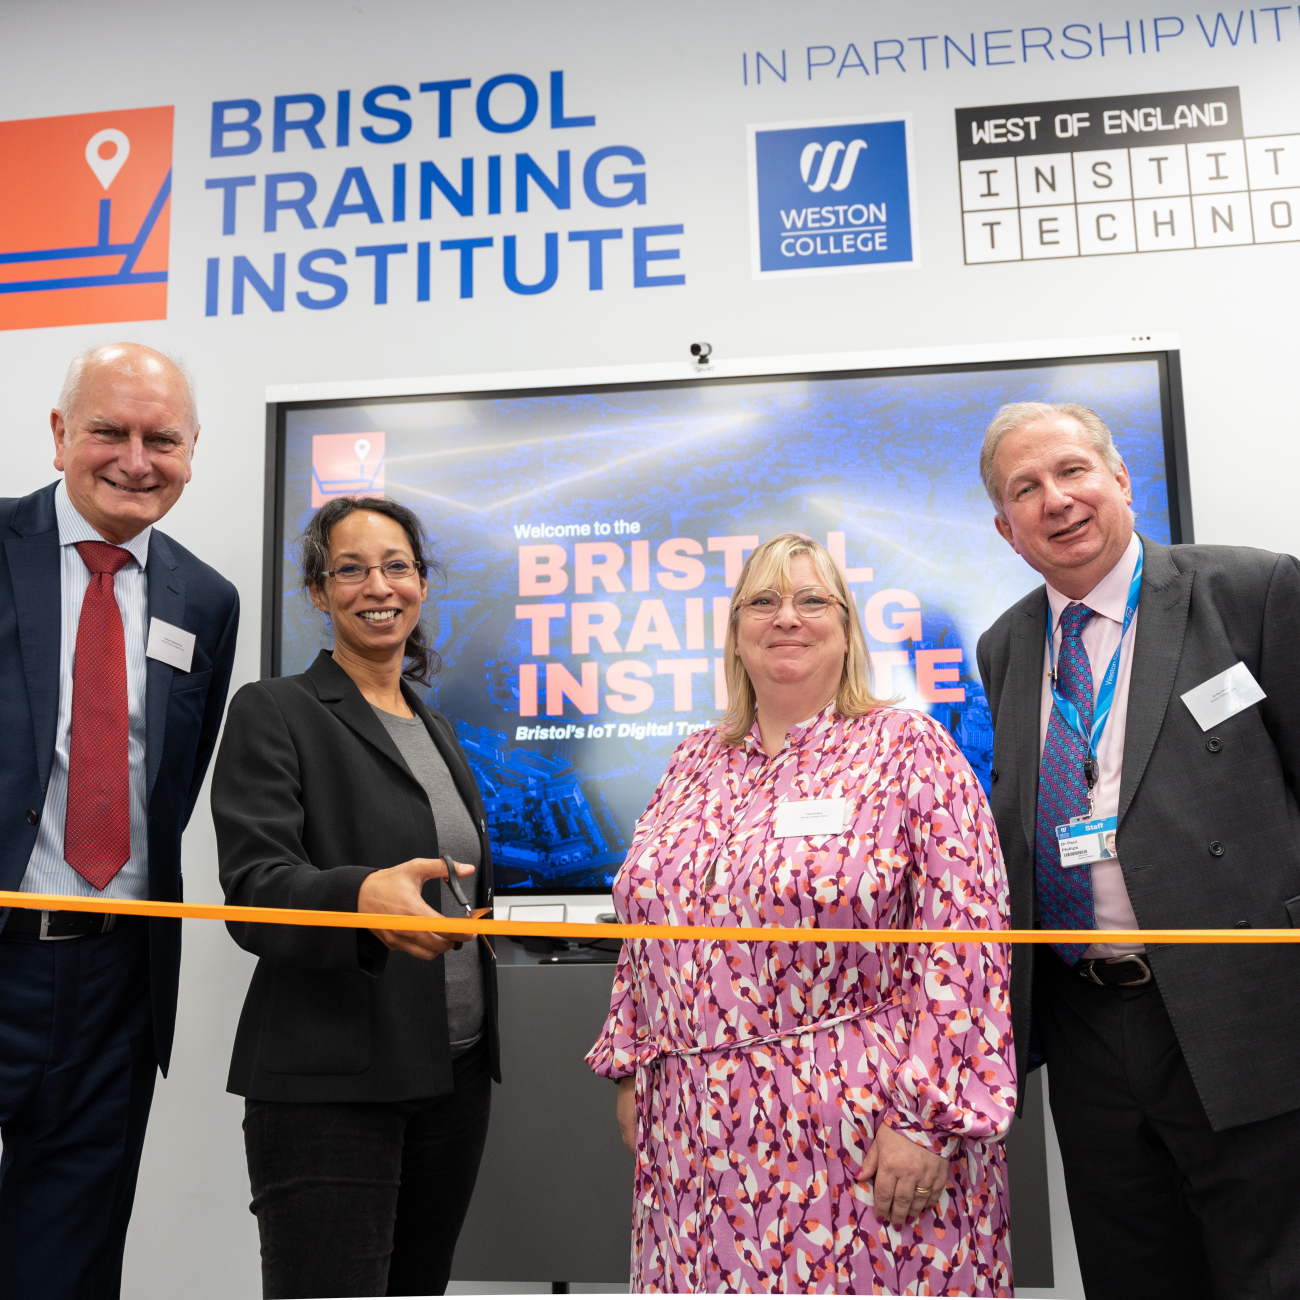 Andrew Leighton Price, Jaya Chakrabarti MBE, Claire Arbery and Sir Paul Phillips cutting the ribbon to the Bristol Training Institute